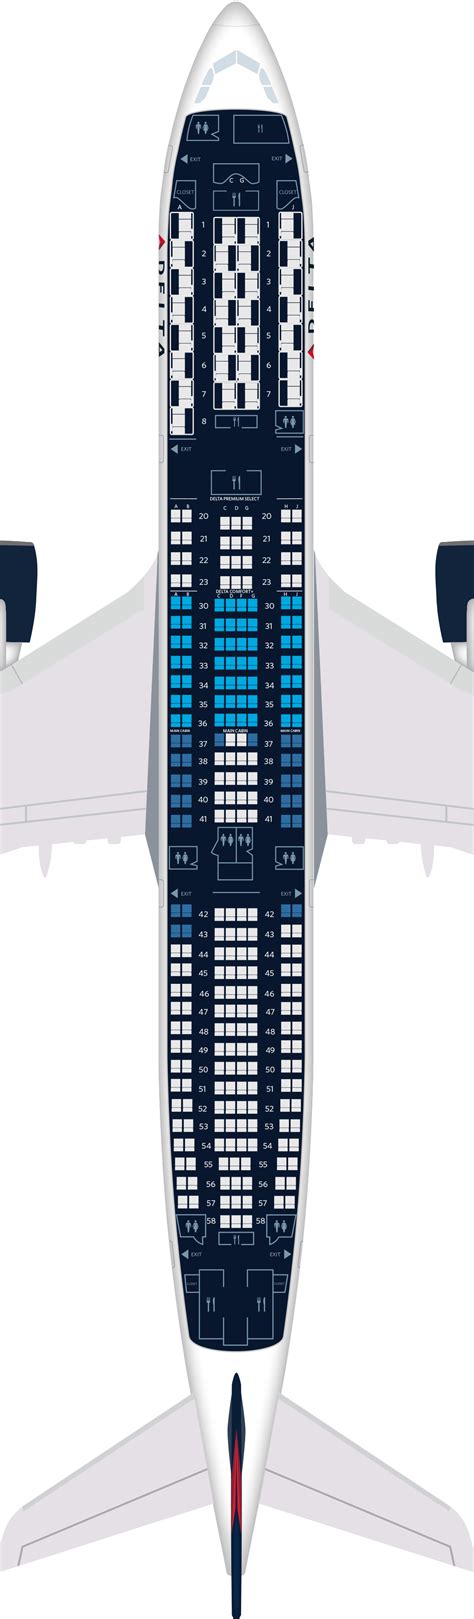 With the introduction of the Airbus A330-900neo, Delta has rolled out its best Premium Select product to date, joining cabins on the retrofitted Boeing 777, ... While Premium Select seats on Delta's A330-900neo are 18.5 inches wide with 38 inches of pitch and 7 inches of recline, Comfort+ and Main Cabin seats on the same aircraft are 18 inches .... 